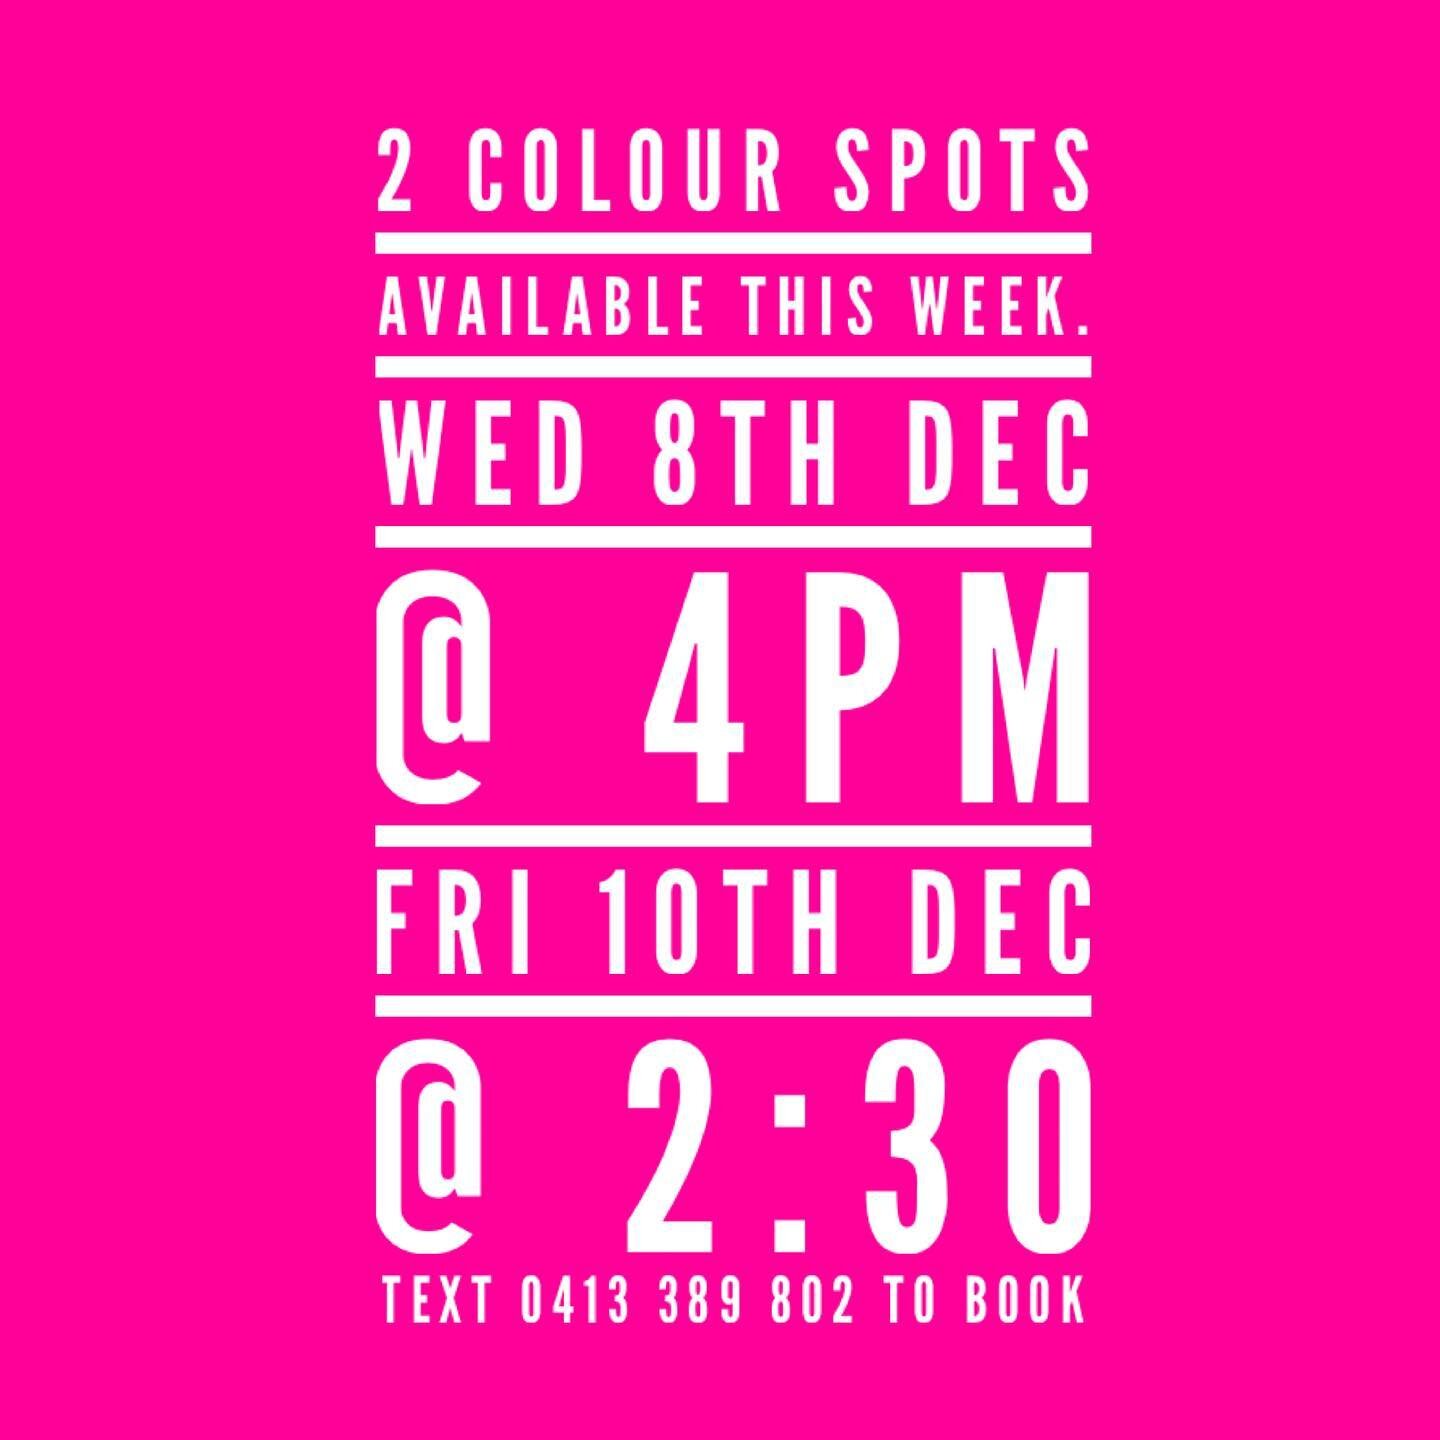 Get in quick if you are looking for a colour appointment this week. Text to book #blondespecialist #hairdressersofinstagram #blondehair #platinumblonde